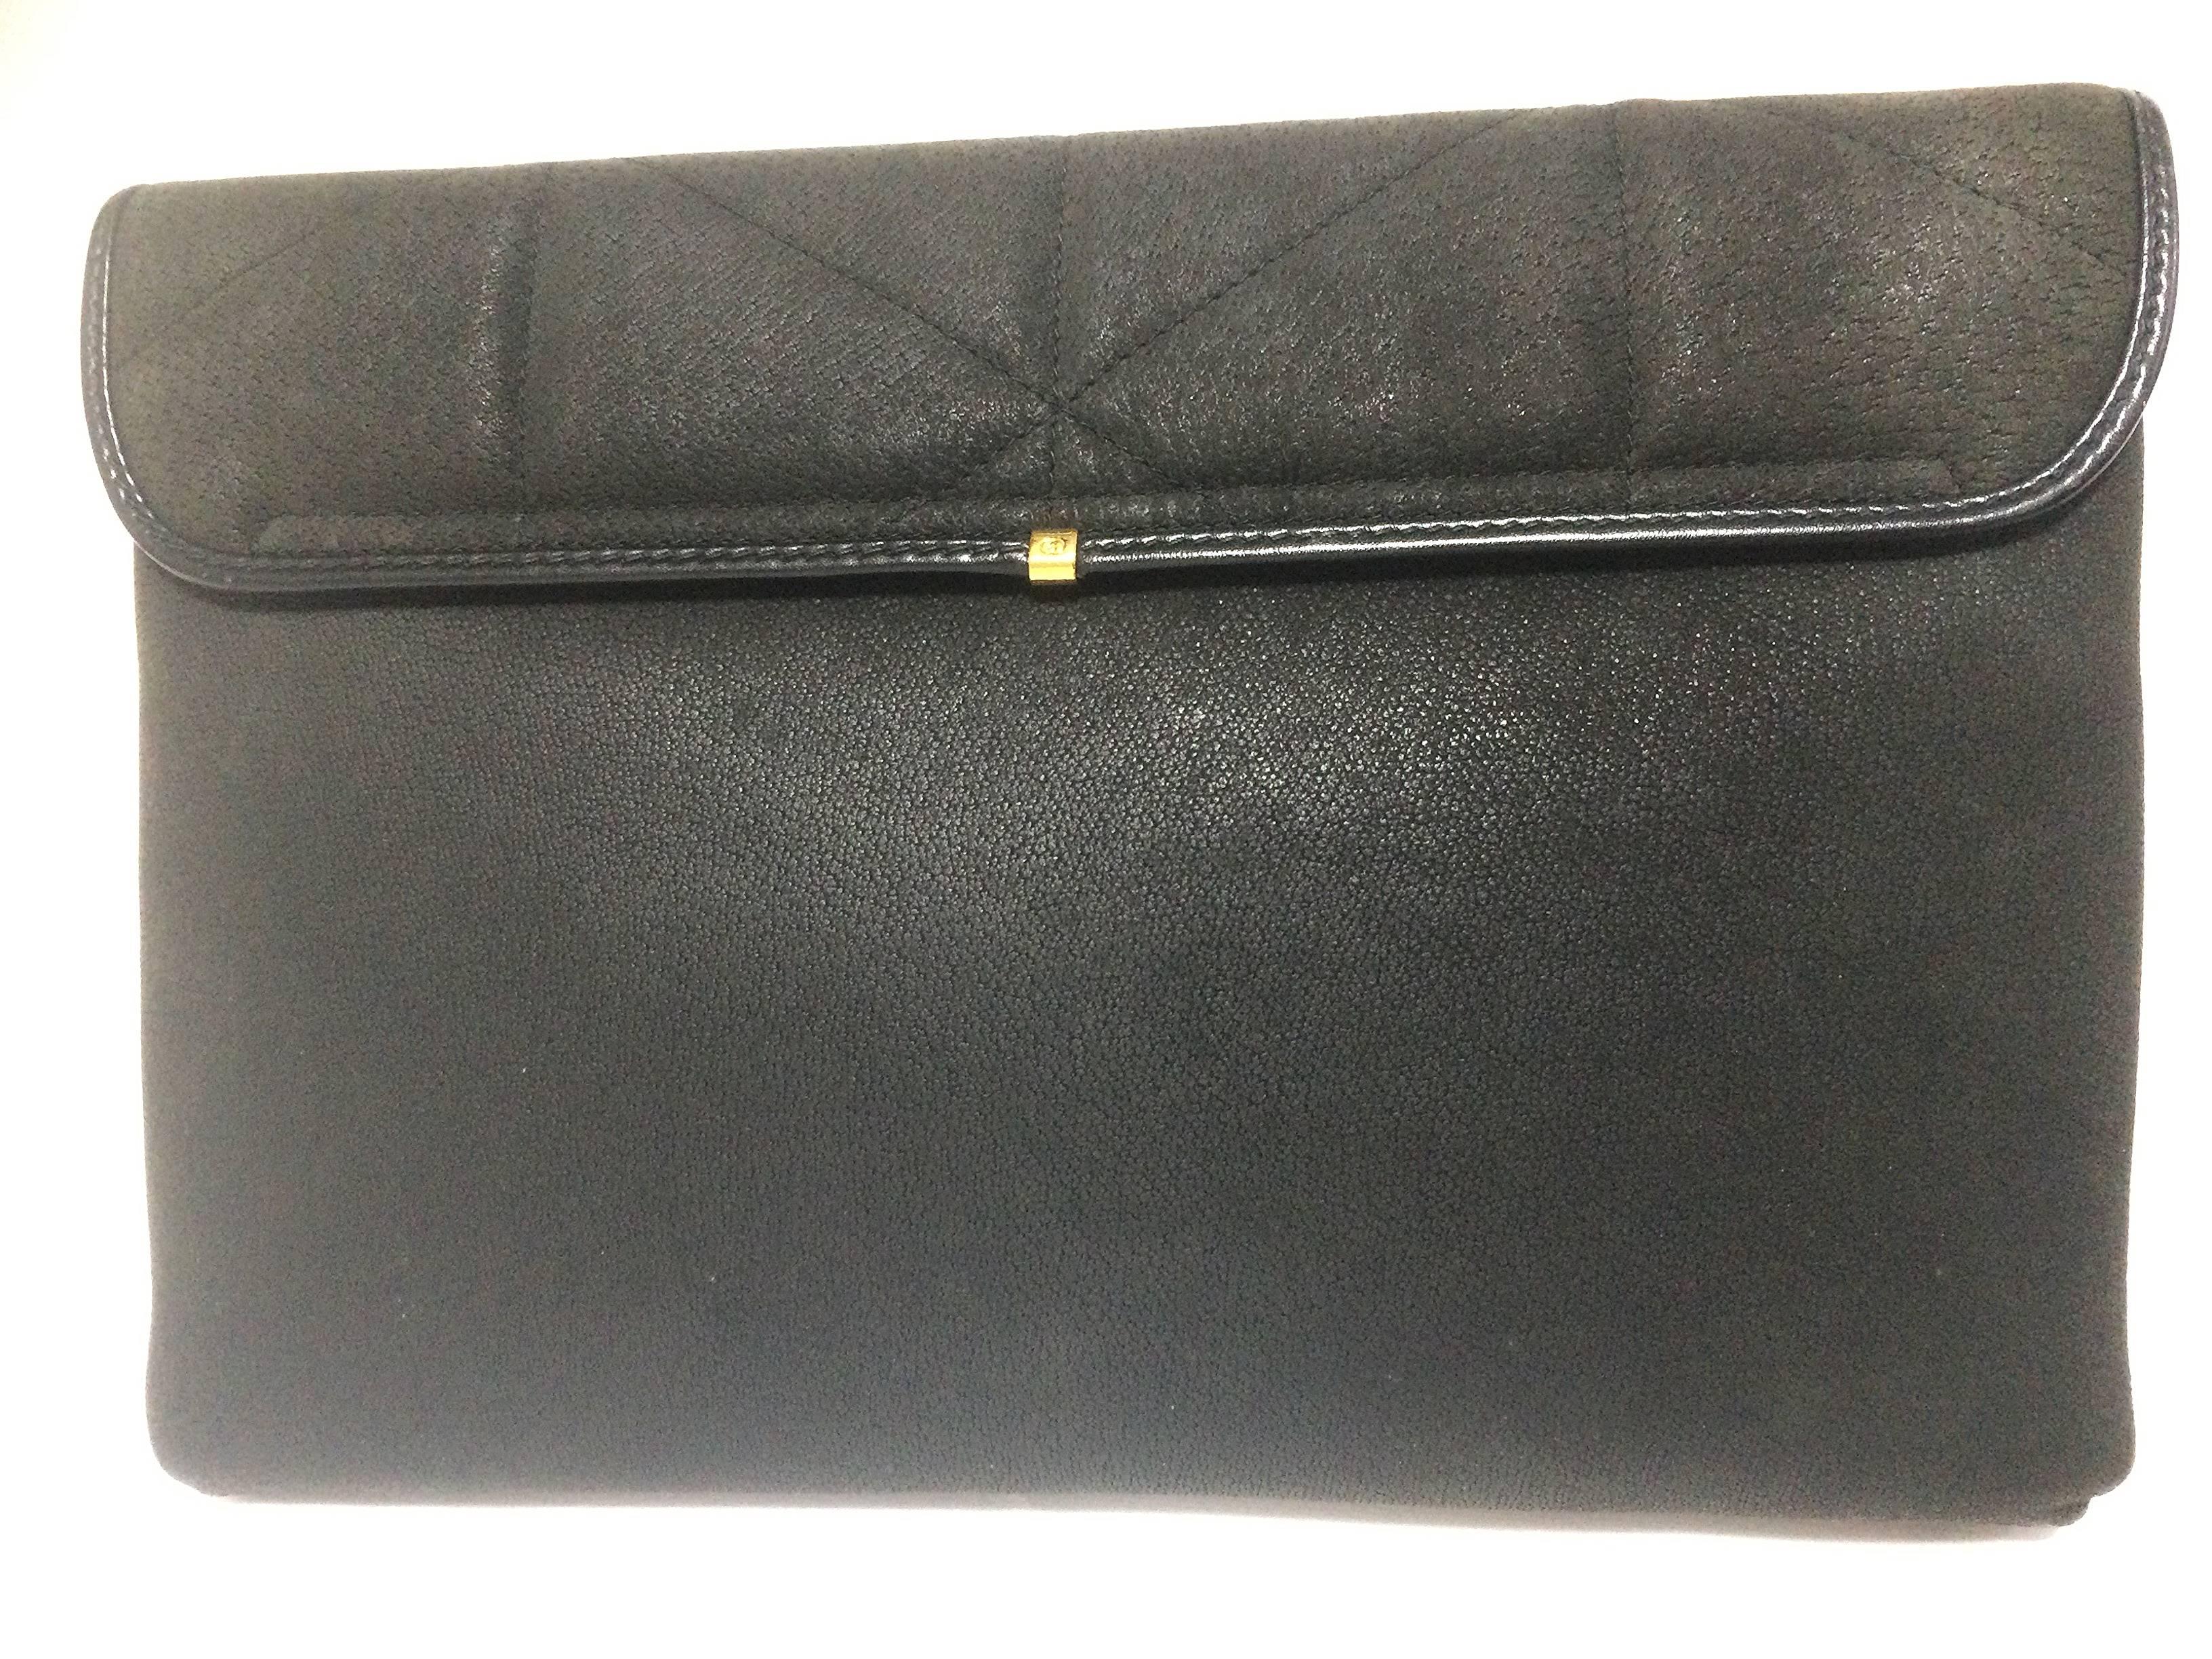 Black Vintage Gucci gray suede leather document clutch purse in geometric stitch. For Sale